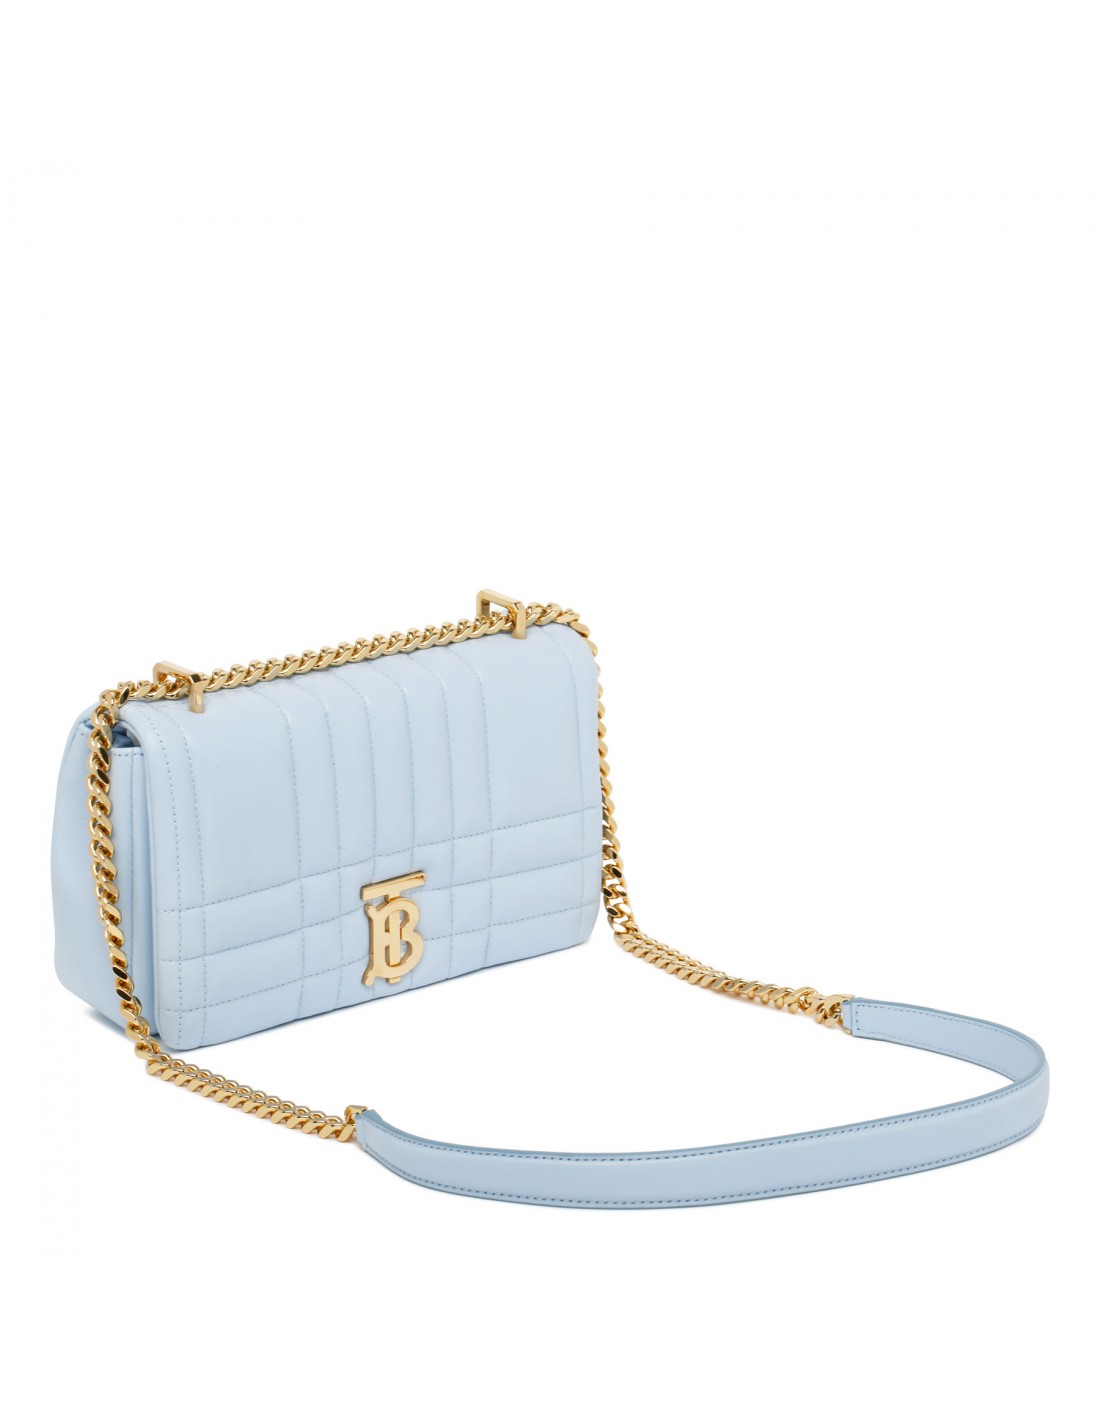 Lola pale blue quilted leather small bag